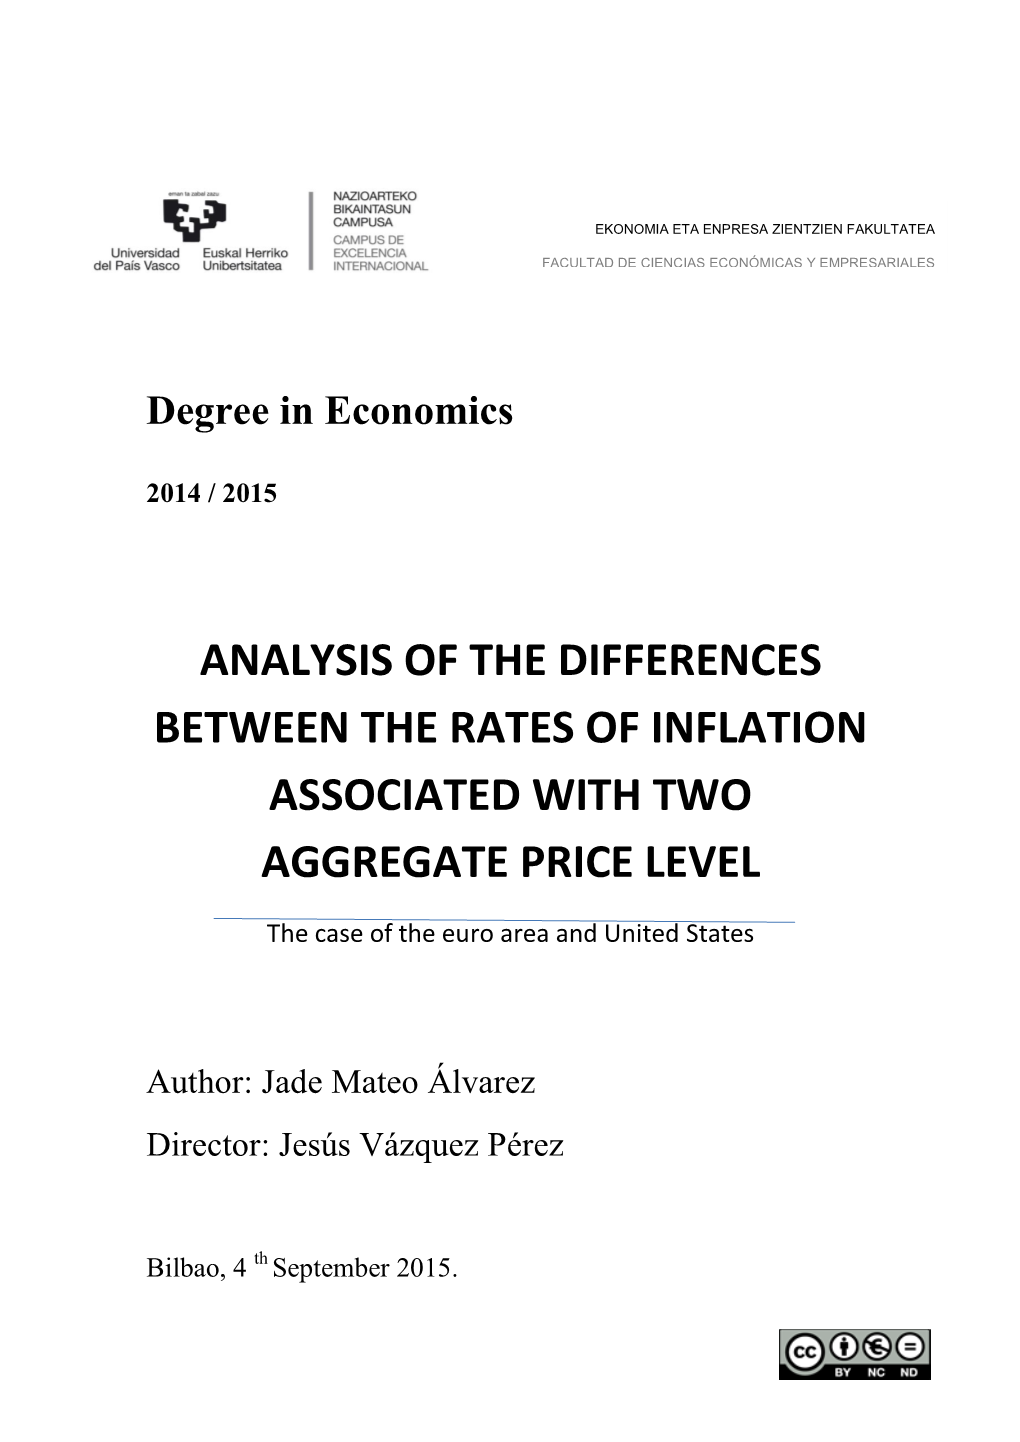 Analysis of the Differences Between the Rates of Inflation Associated with Two Aggregate Price Level